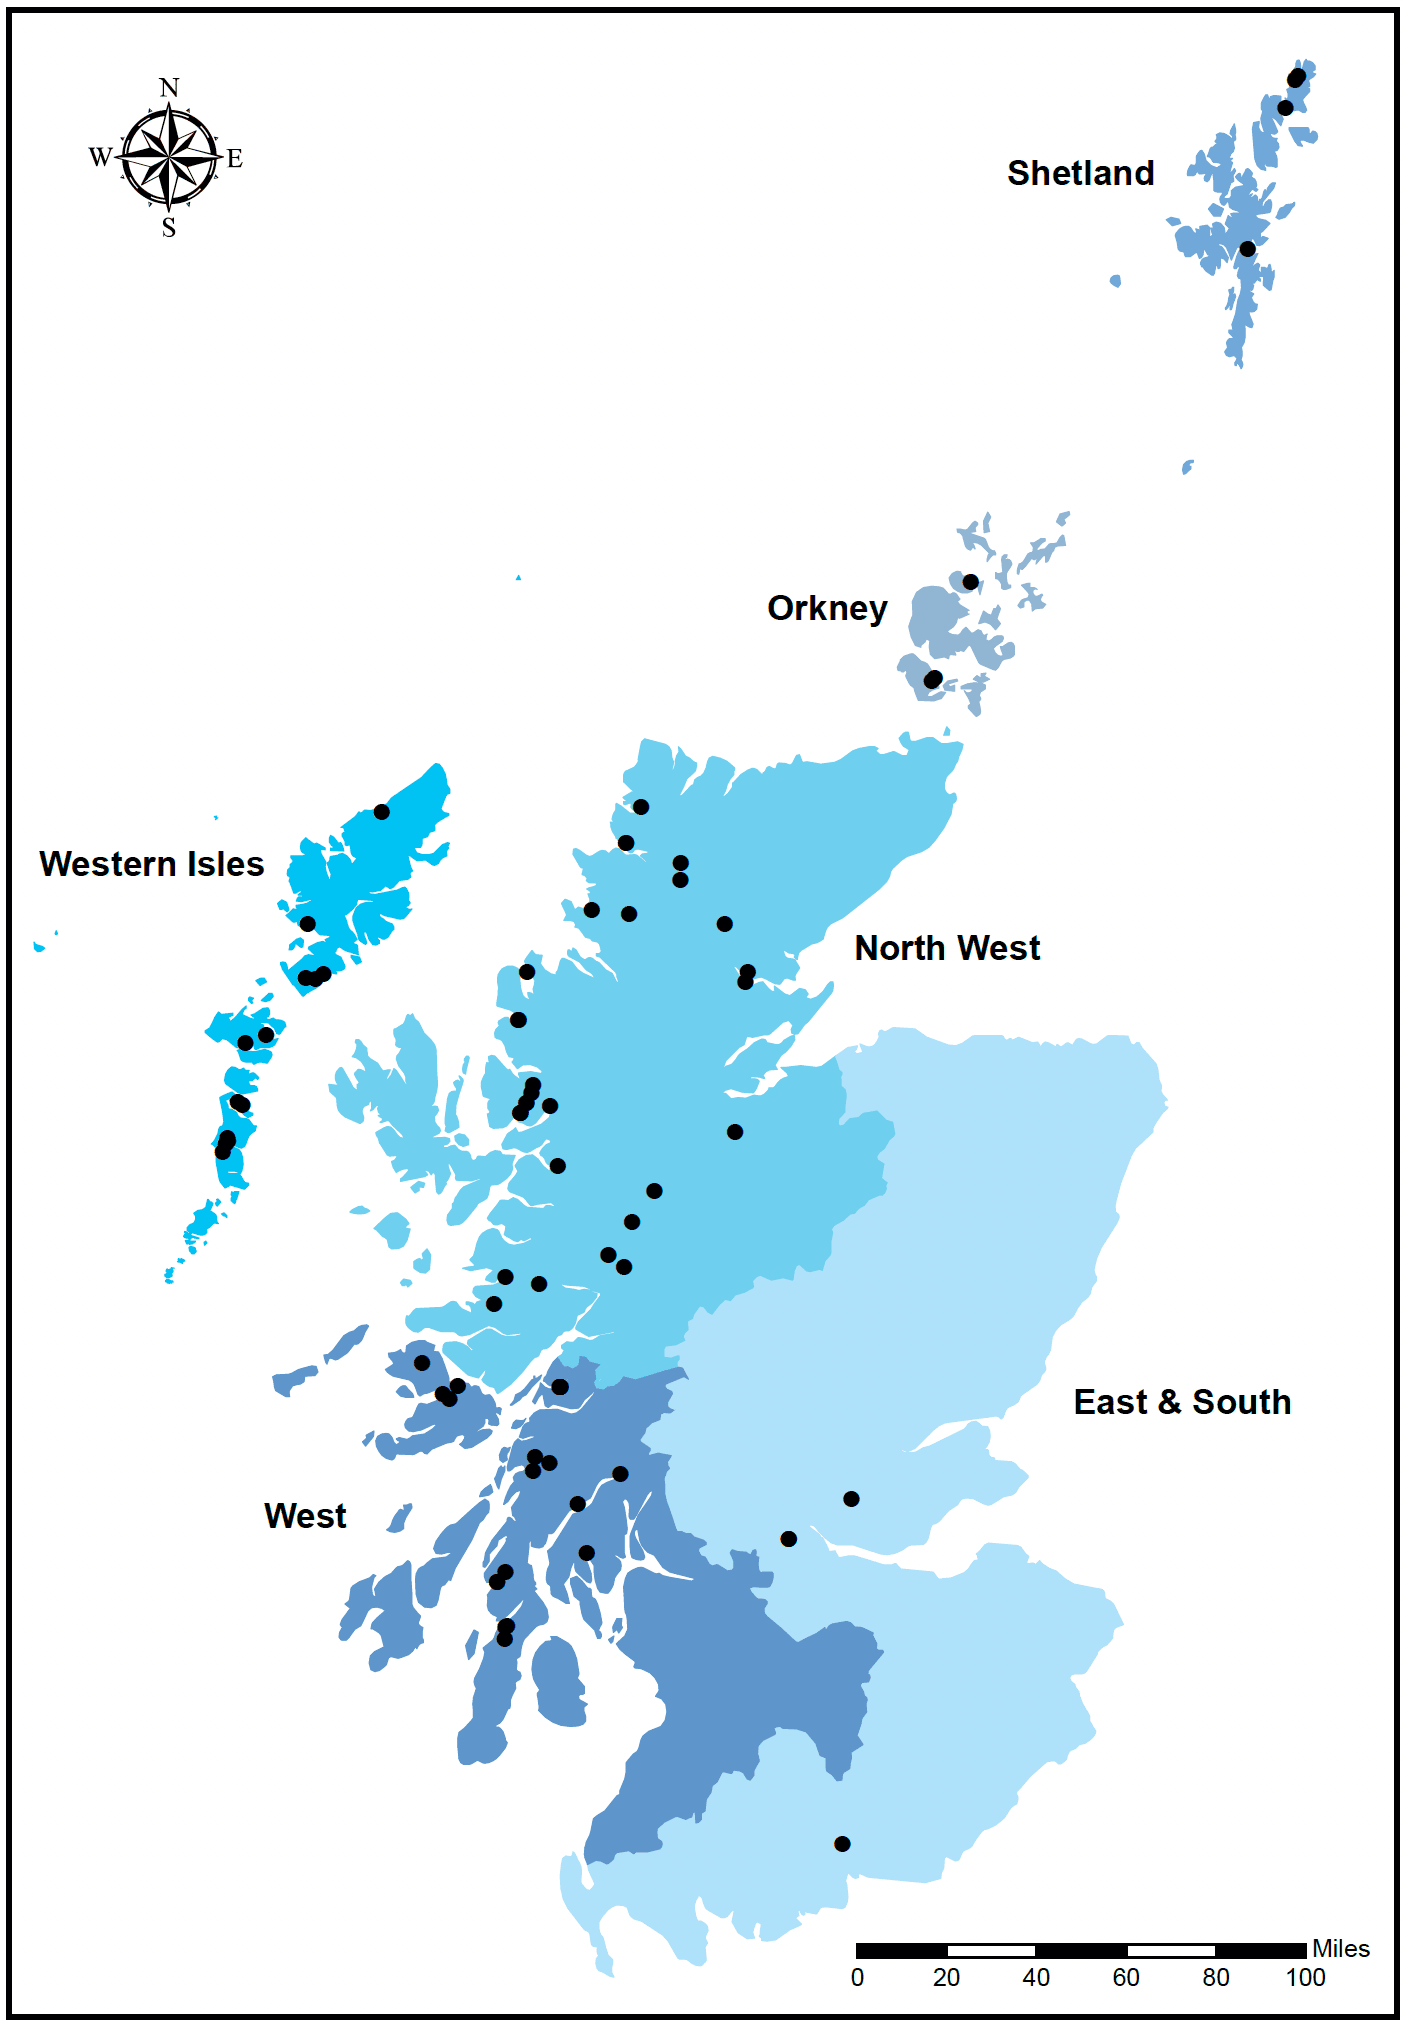 This is a map showing the distribution of active Atlantic salmon smolt sites in Scotland in 2020. The map is split into 6 areas: Shetland, Orkney, North West, East & South, West and Western Isles and has black dots showing where each site is on the map.